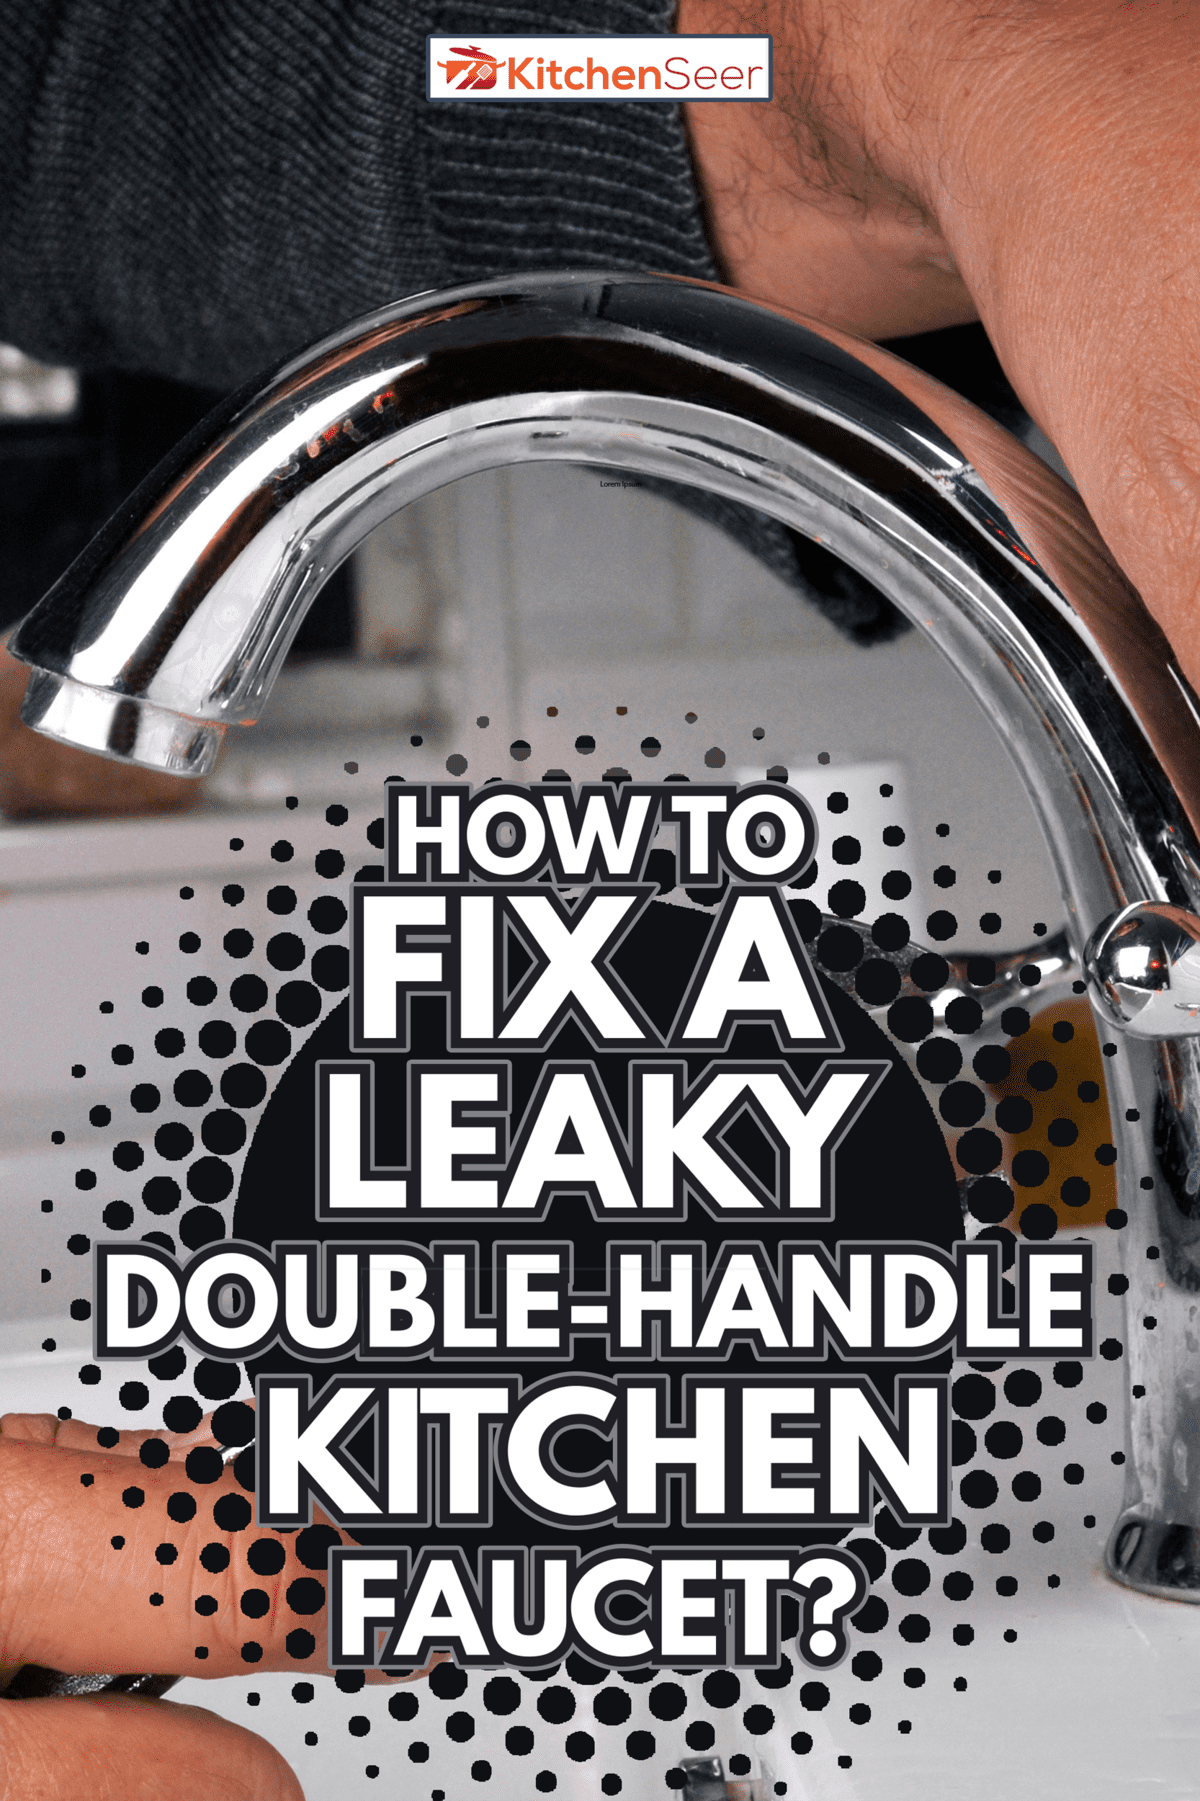 Repairing a faucet - How To Fix A Leaky Double-Handle Kitchen Faucet